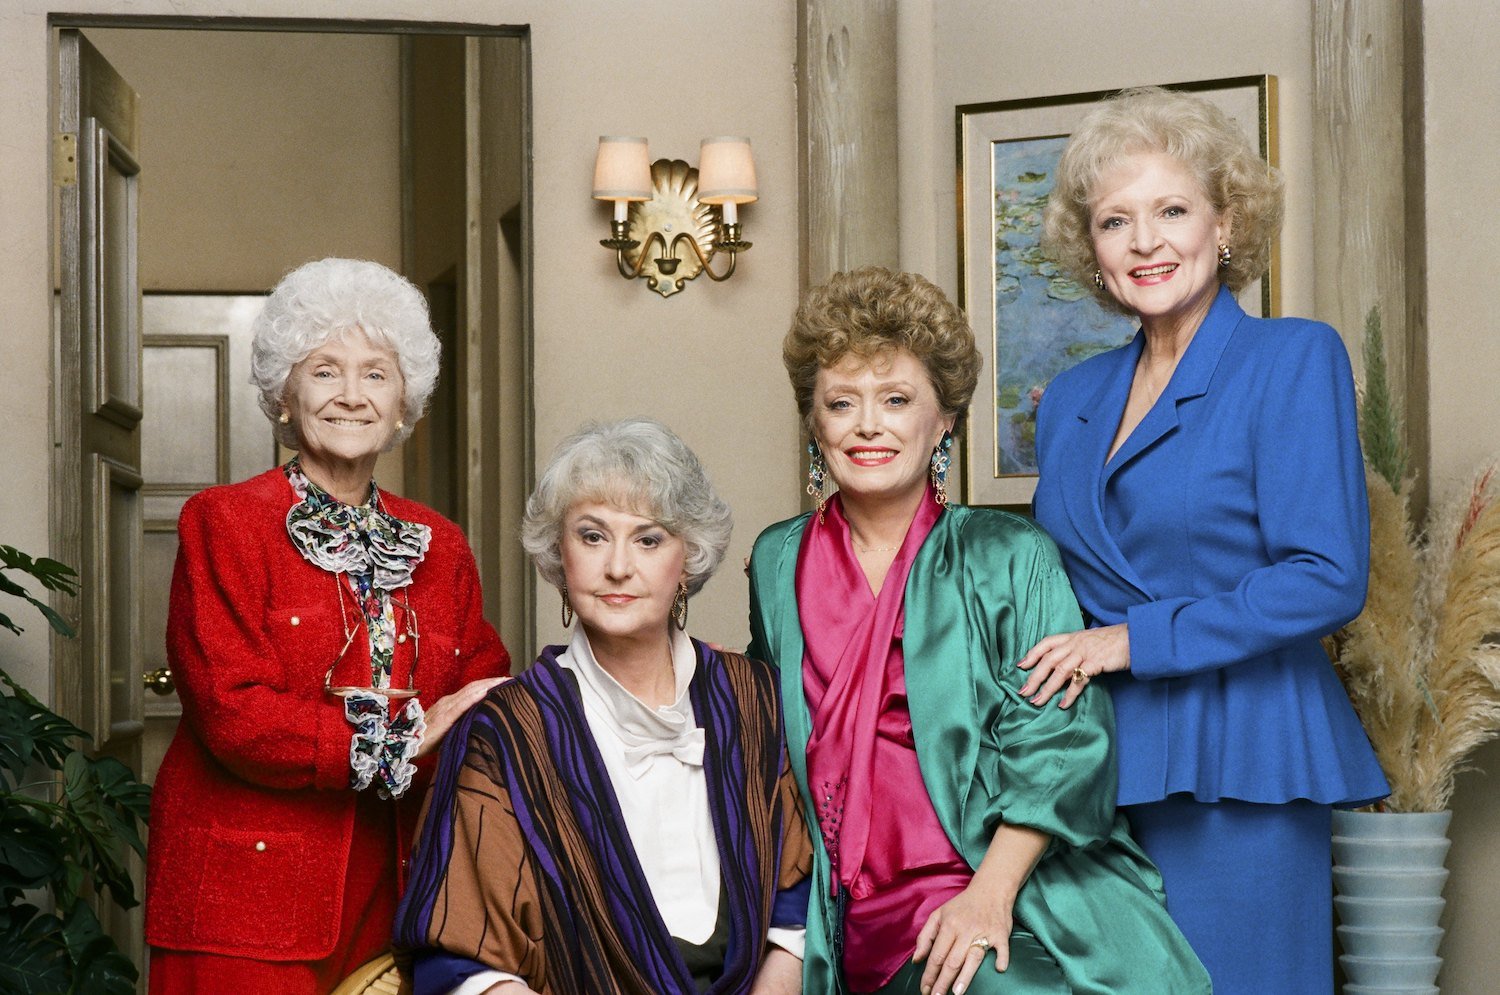 Estelle Getty, Bea Arthur, Rue McClanahan, and Betty White on 'The Golden Girls'